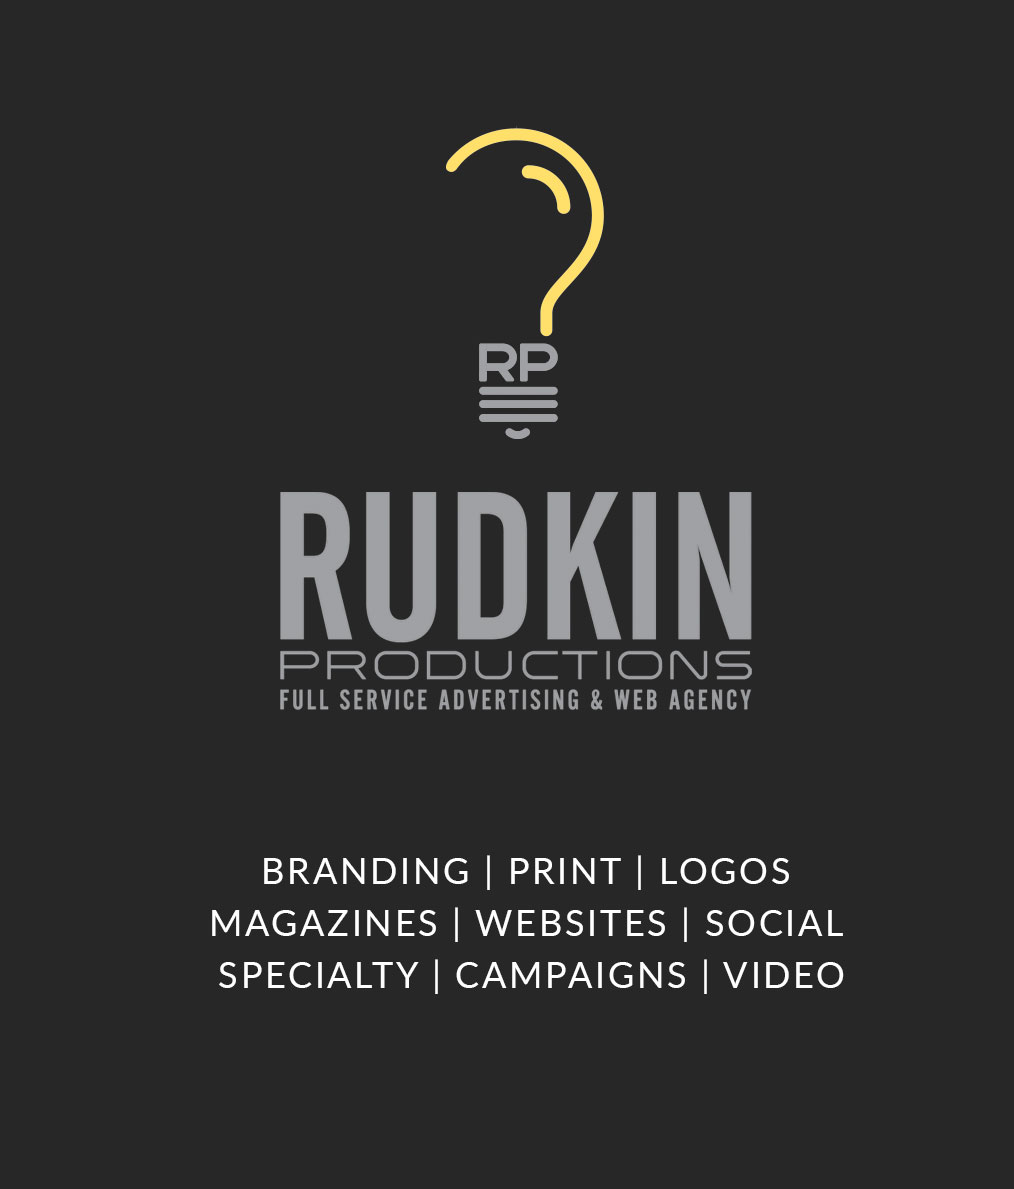 Rudkin Productions - Advertising and Web Agency